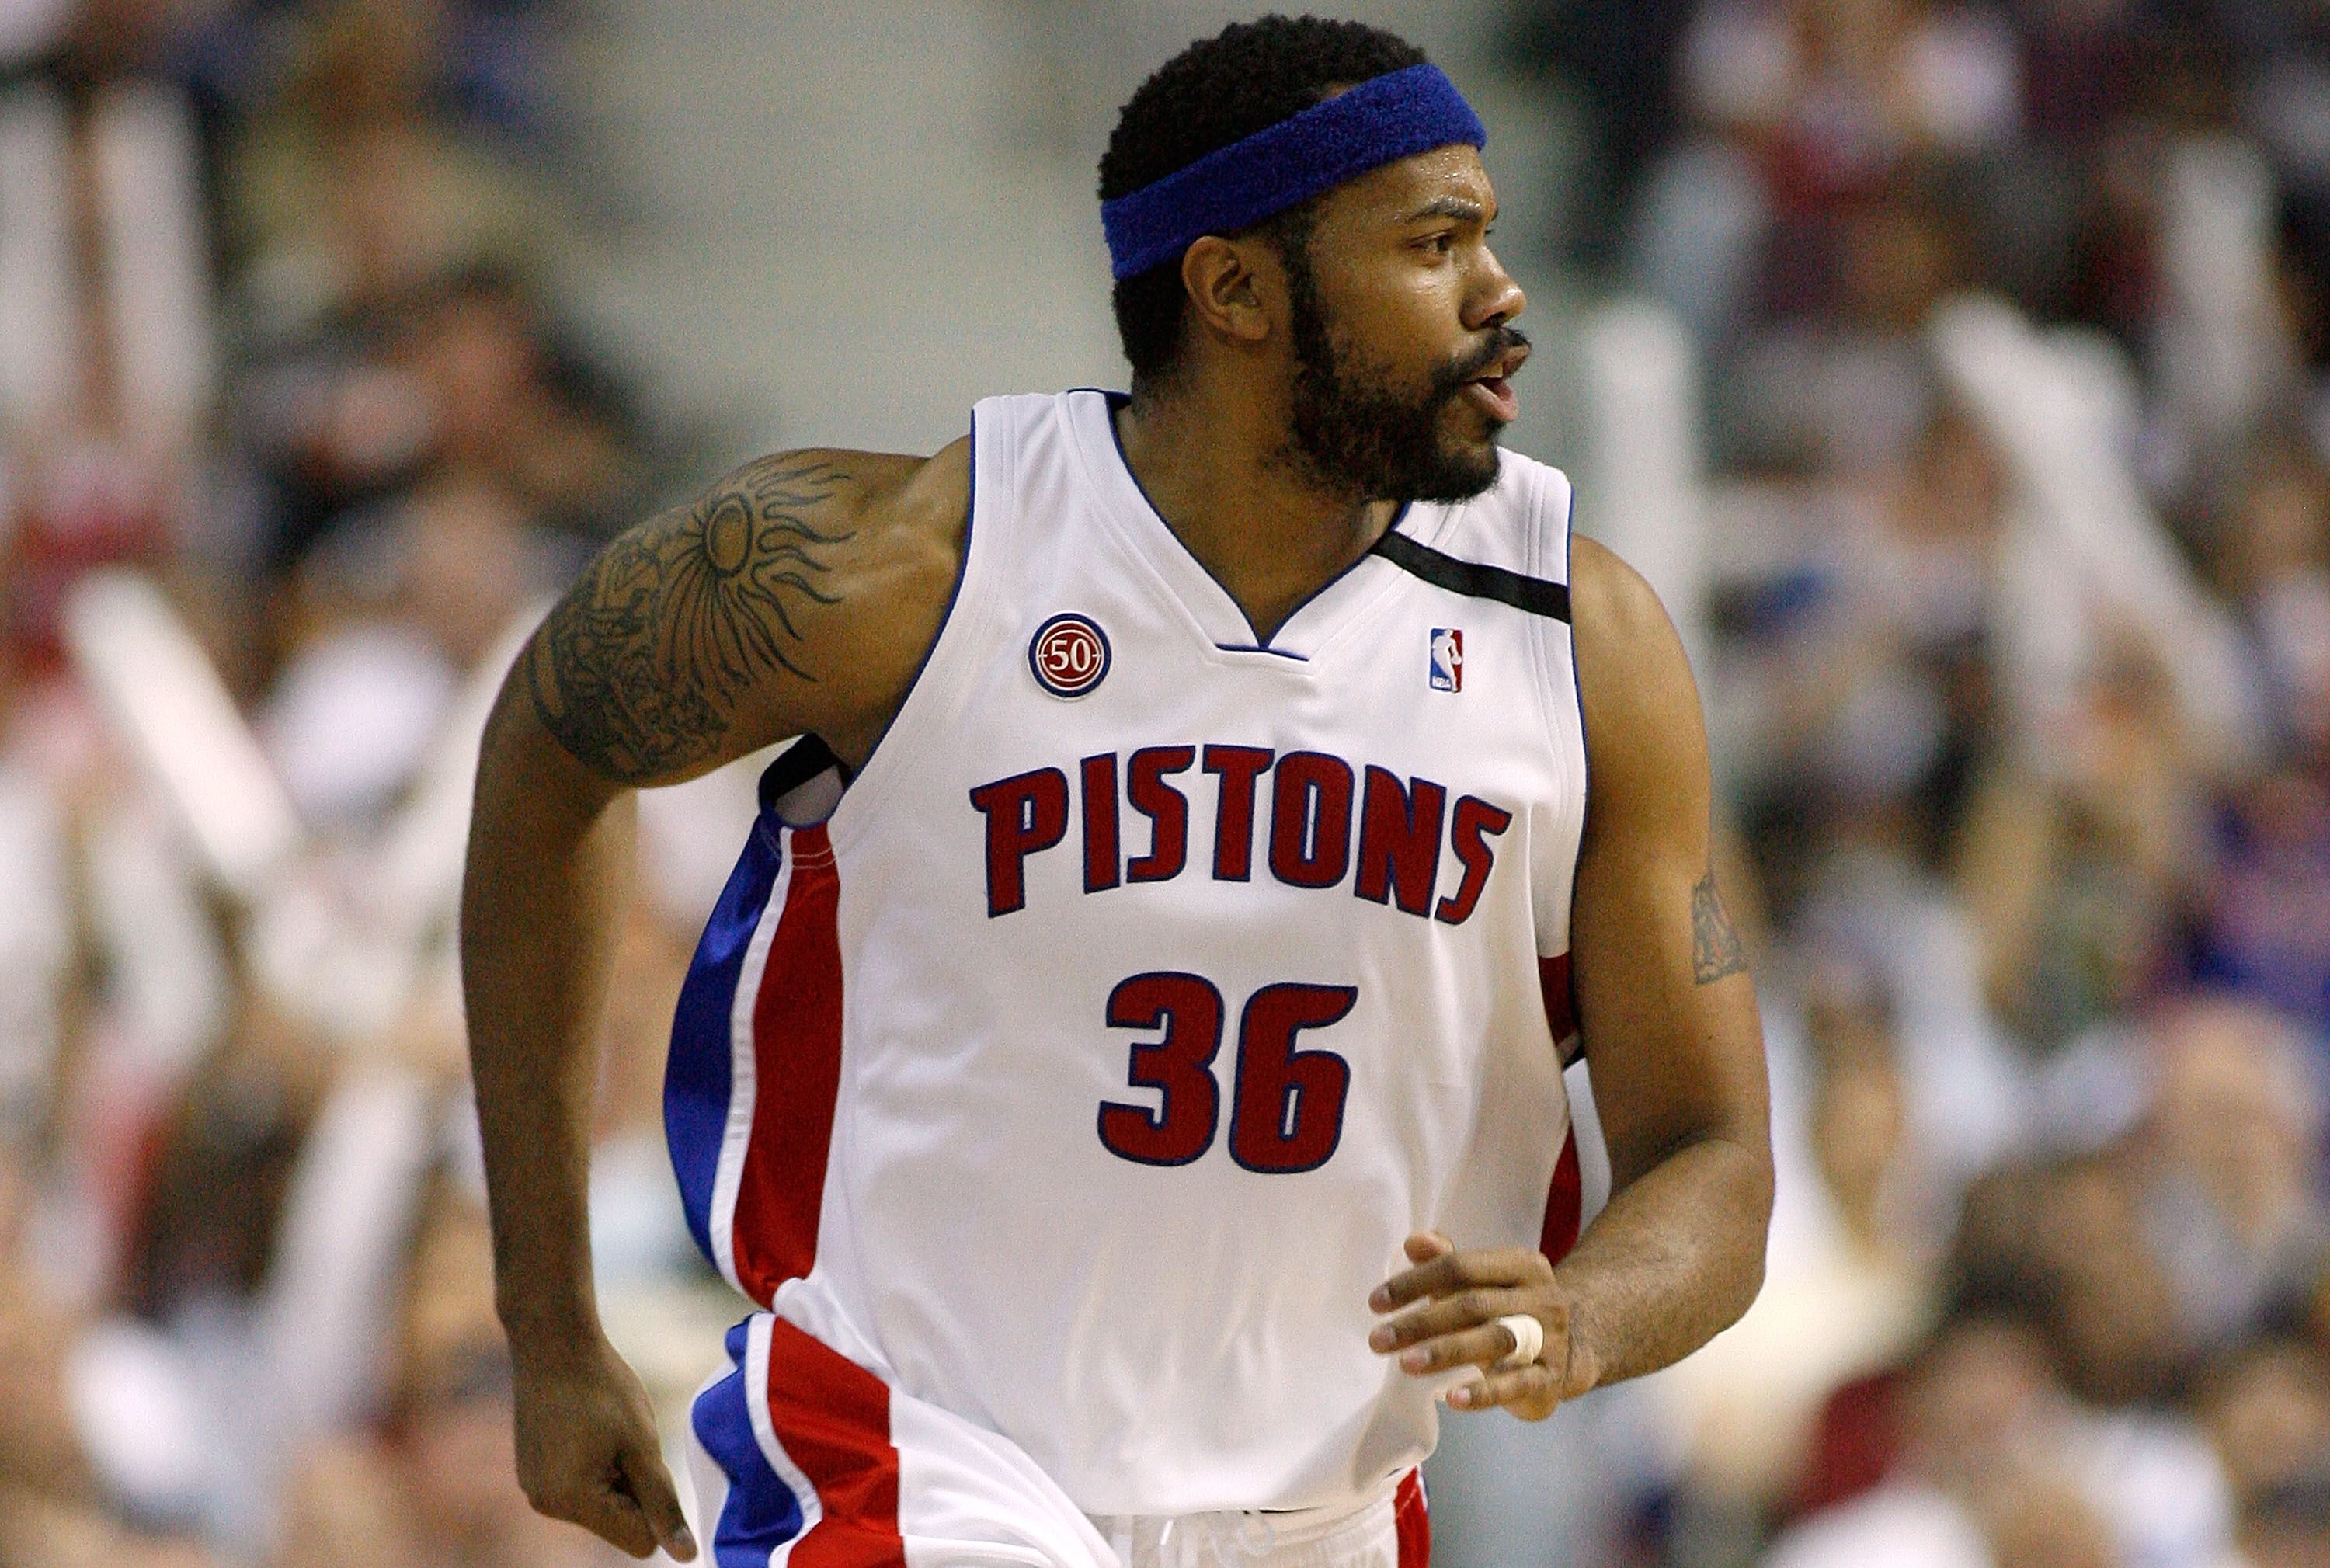 Rasheed Wallace announced as the Assistant Coach for the Detroit Pistons